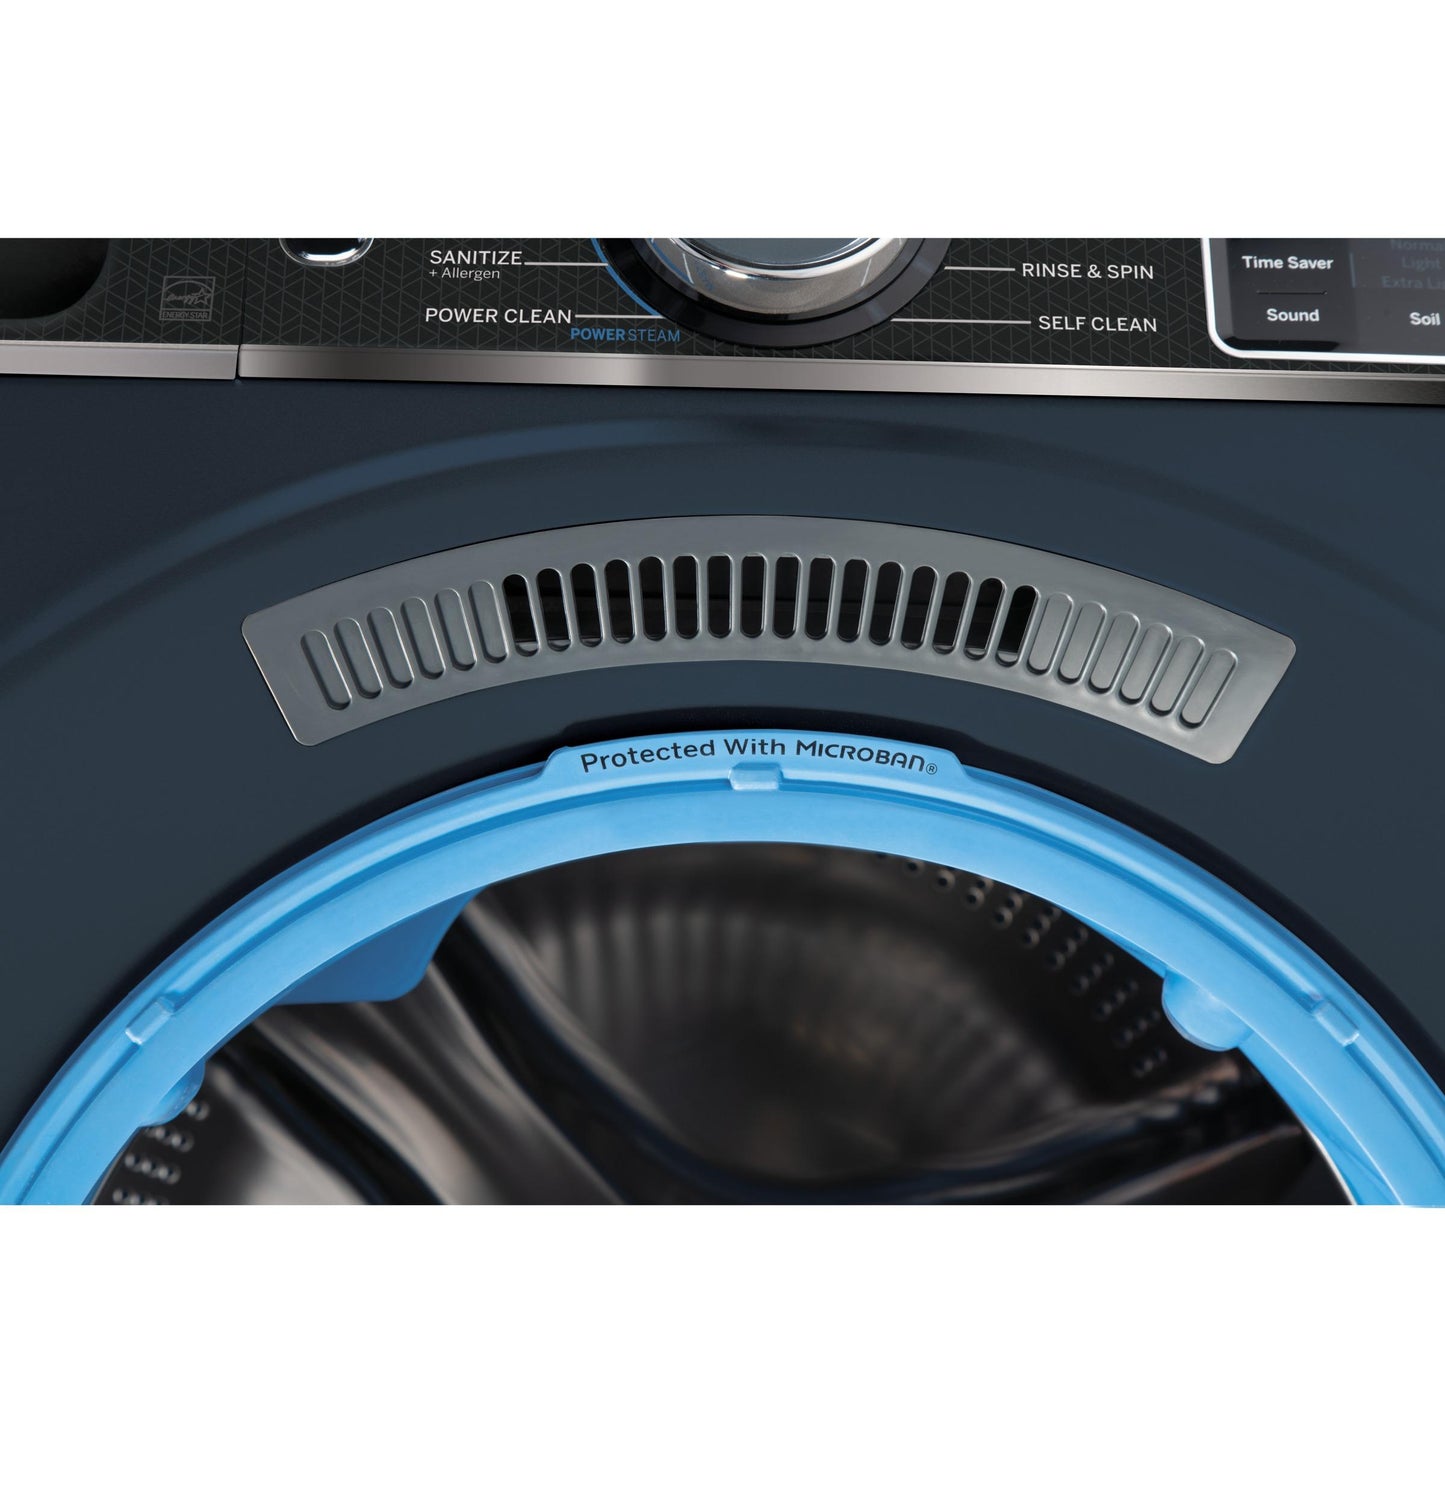 Ge Appliances GFW655SPVDS Ge® 5.0 Cu. Ft. Capacity Smart Front Load Energy Star® Steam Washer With Smartdispense&#8482; Ultrafresh Vent System With Odorblock&#8482; And Sanitize + Allergen